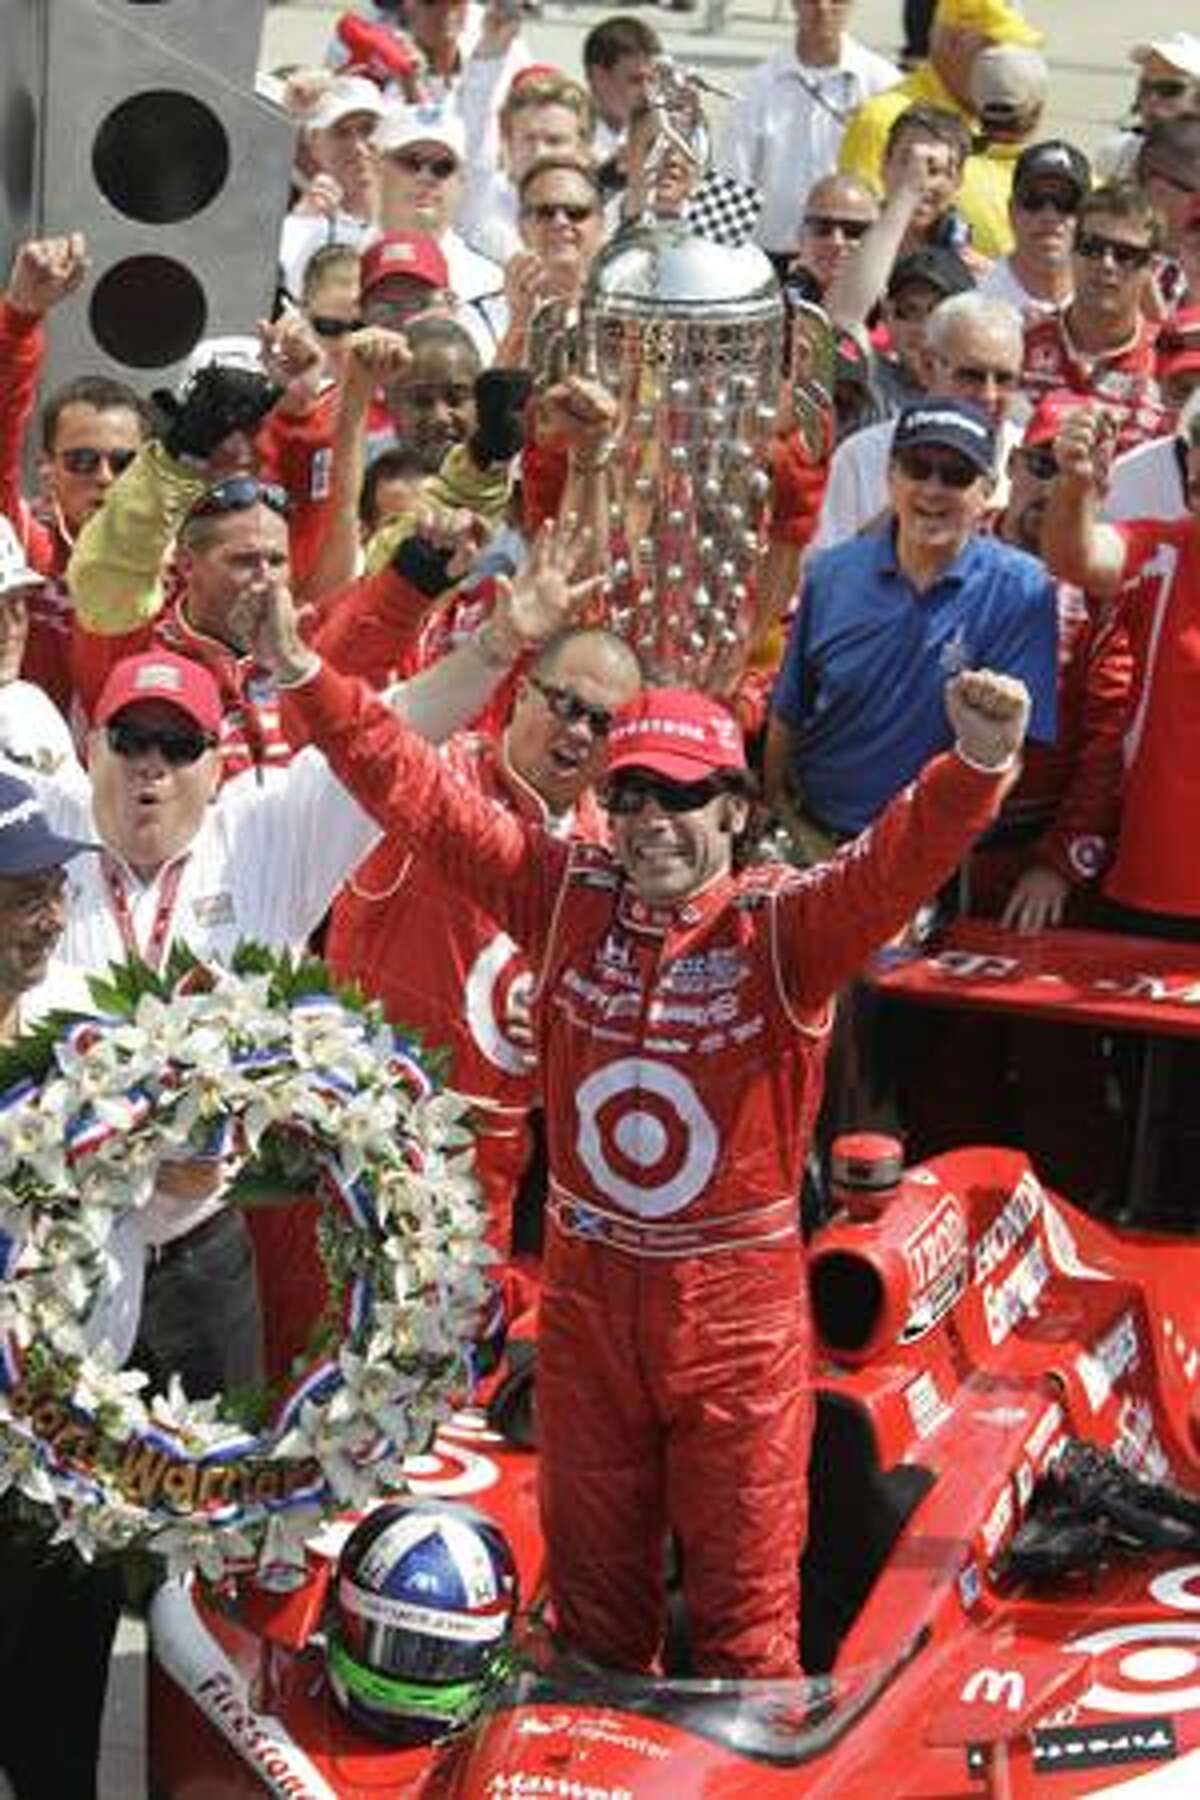 Dario Franchitti, of Scotland, celebrates after winning the Indianapolis 500 auto race at Indianapolis Motor Speedway in Indianapolis, Sunday, May 30, 2010. At left in white is team owner Chip Ganassi. At rear is the Borg-Warner Trophy. (AP Photo/Michael Conroy)